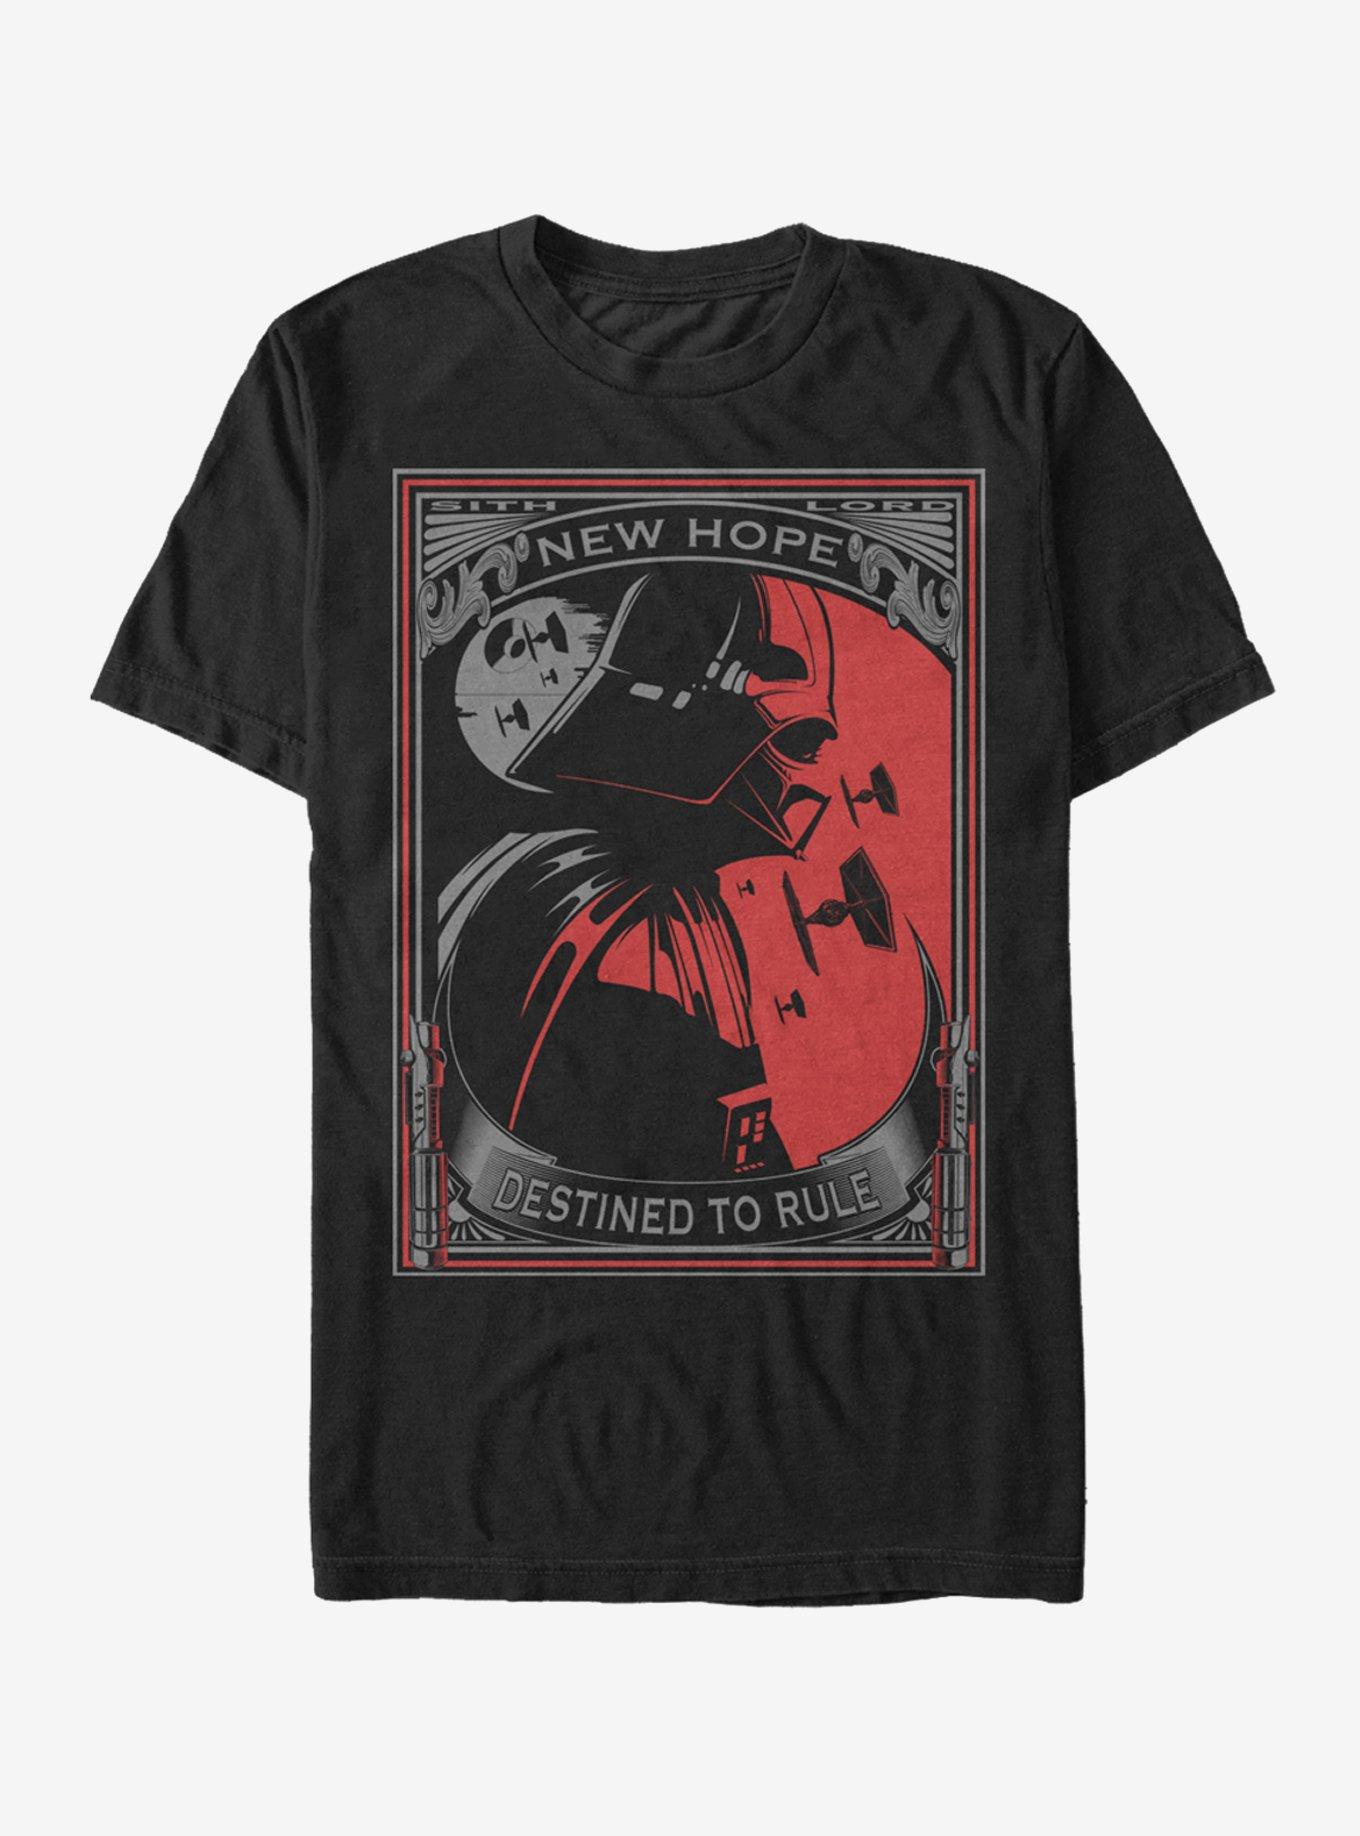 Star Wars Darth Vader Destined to Rule T-Shirt